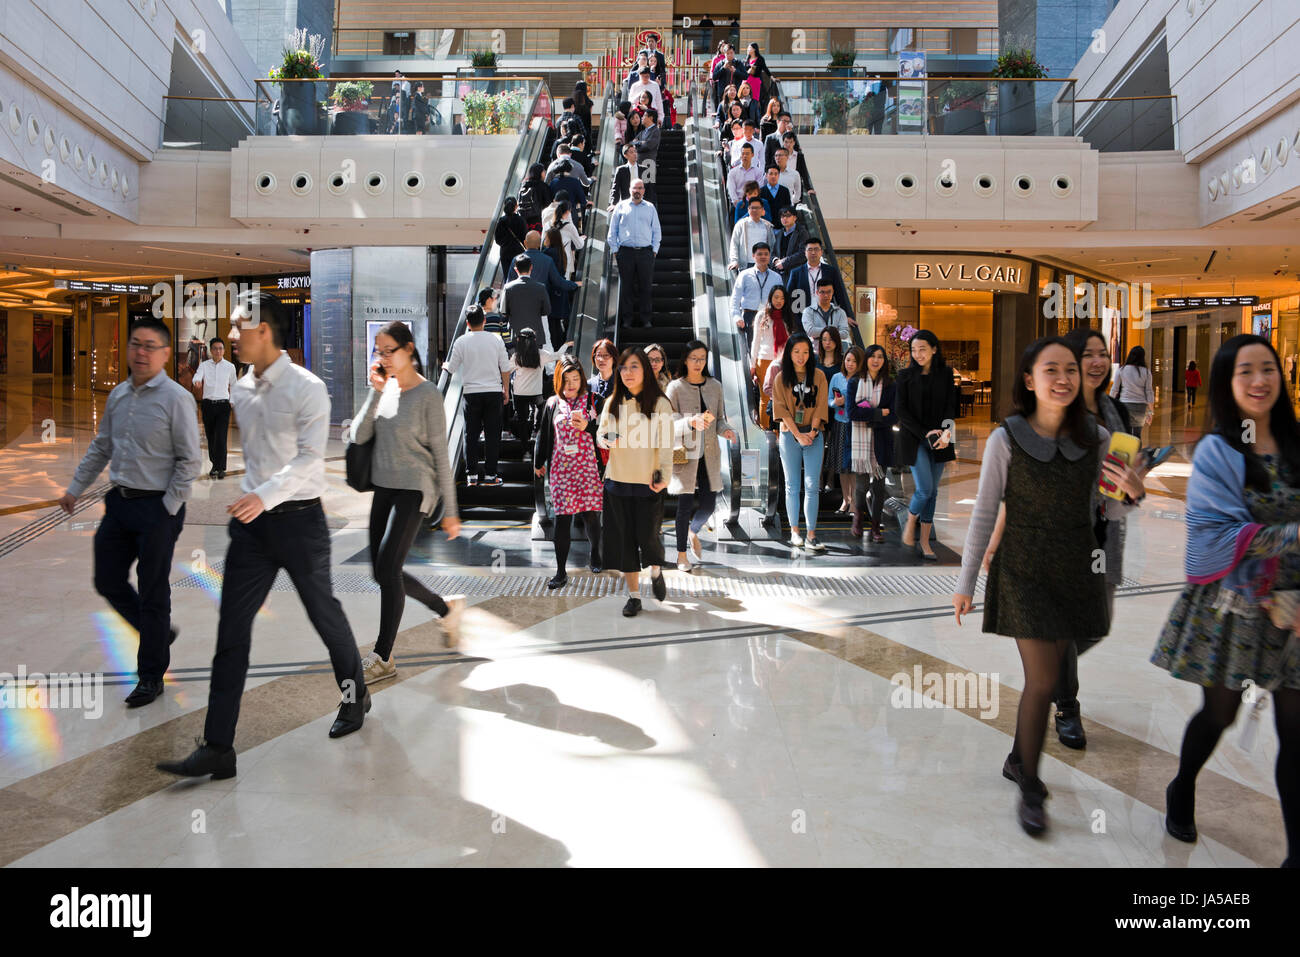 Horizontal view of people on the escalators at the Elements shopping mall in Hong Kong, China. Stock Photo